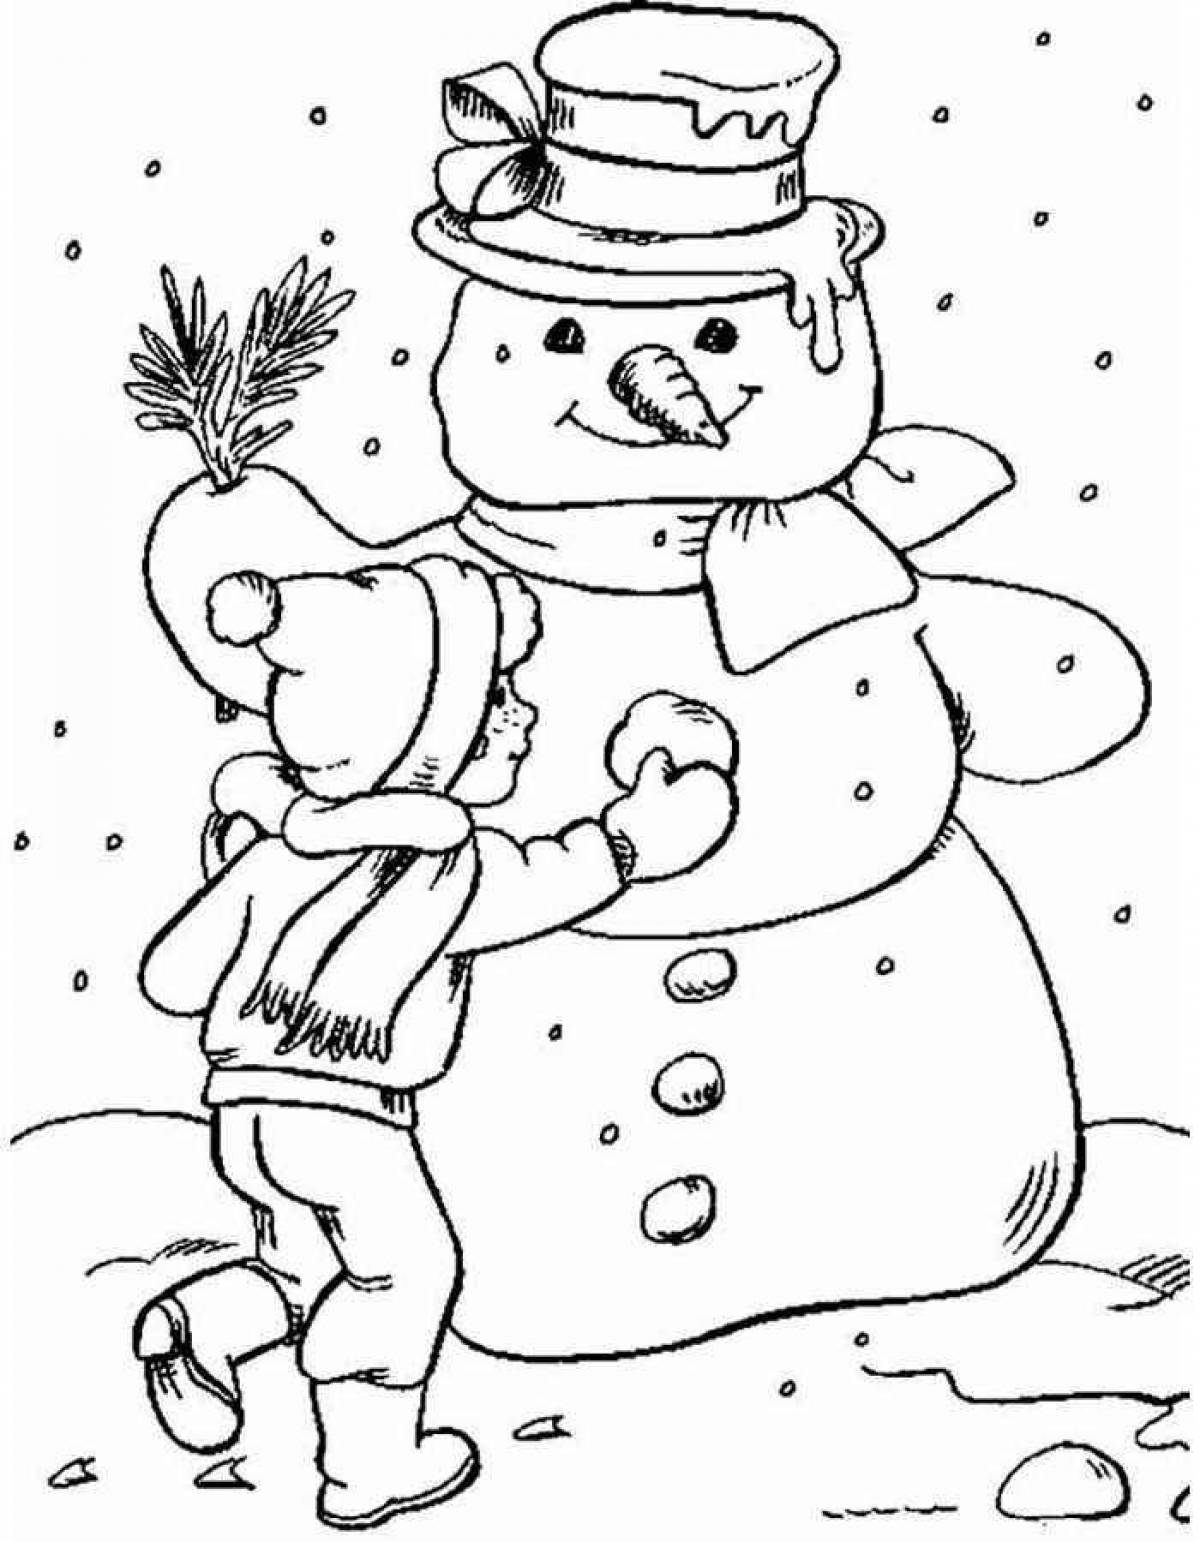 Bright coloring snowman for children 4-5 years old